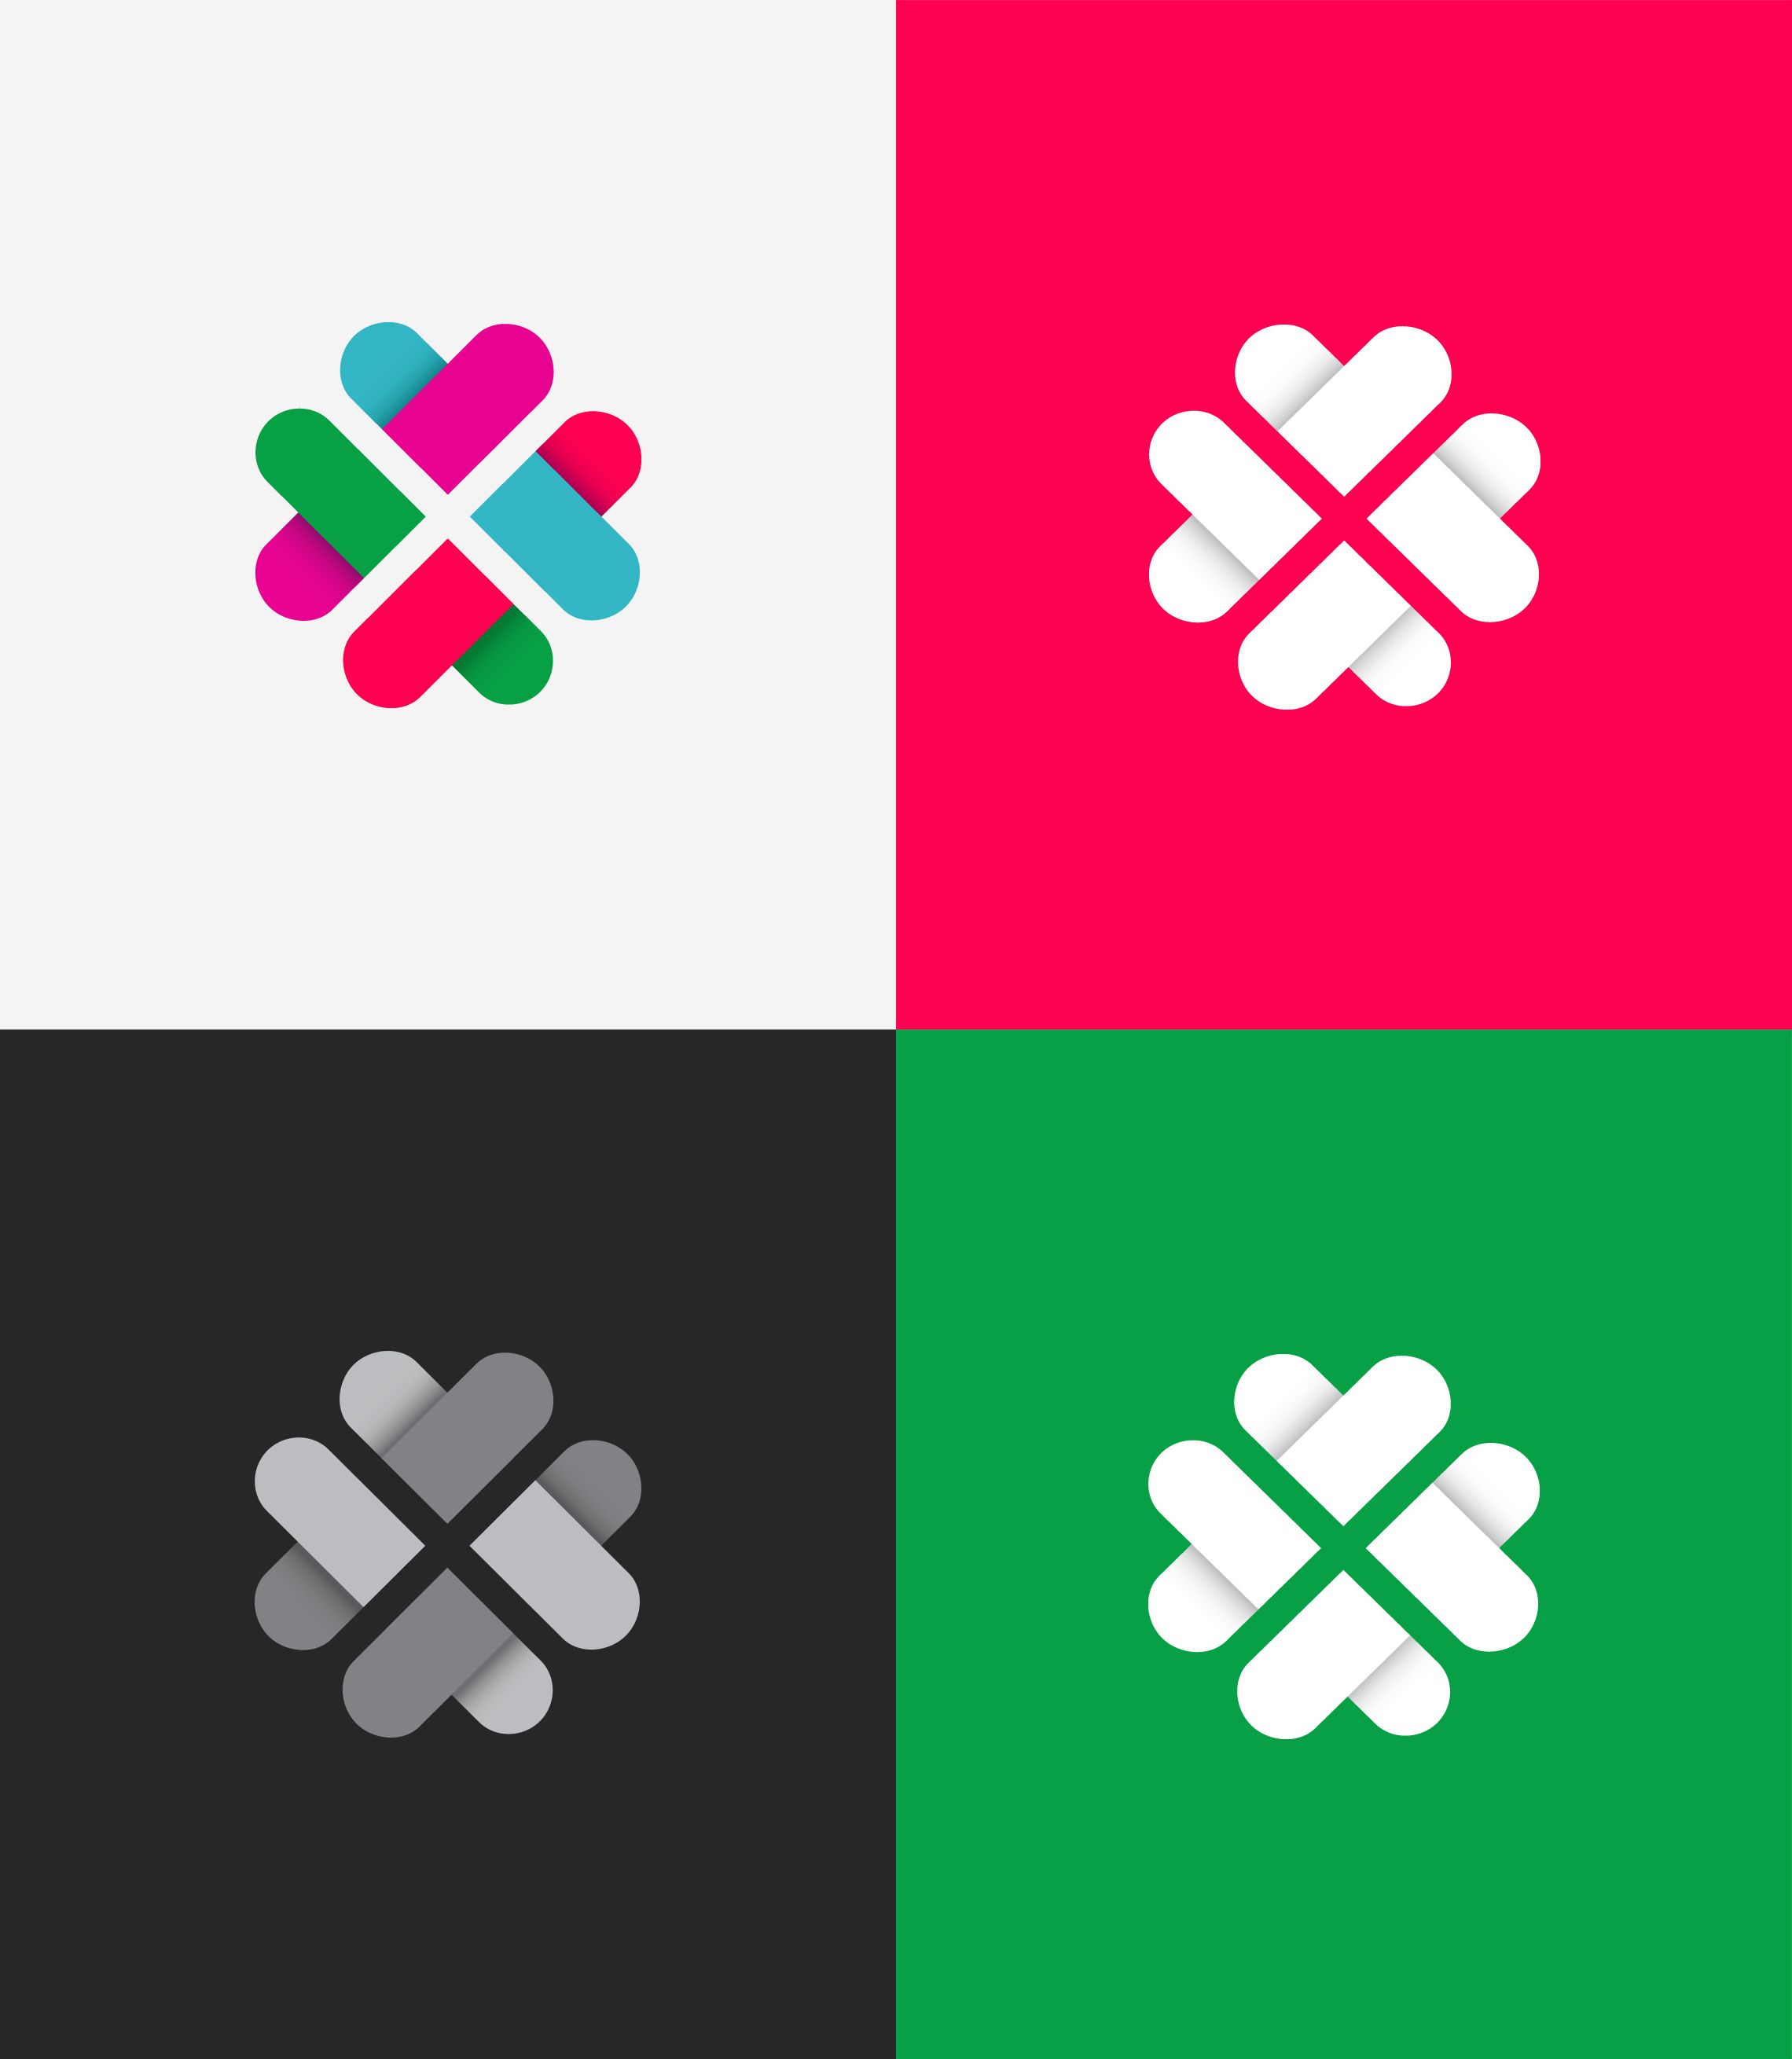 overlapping logo on various background colors